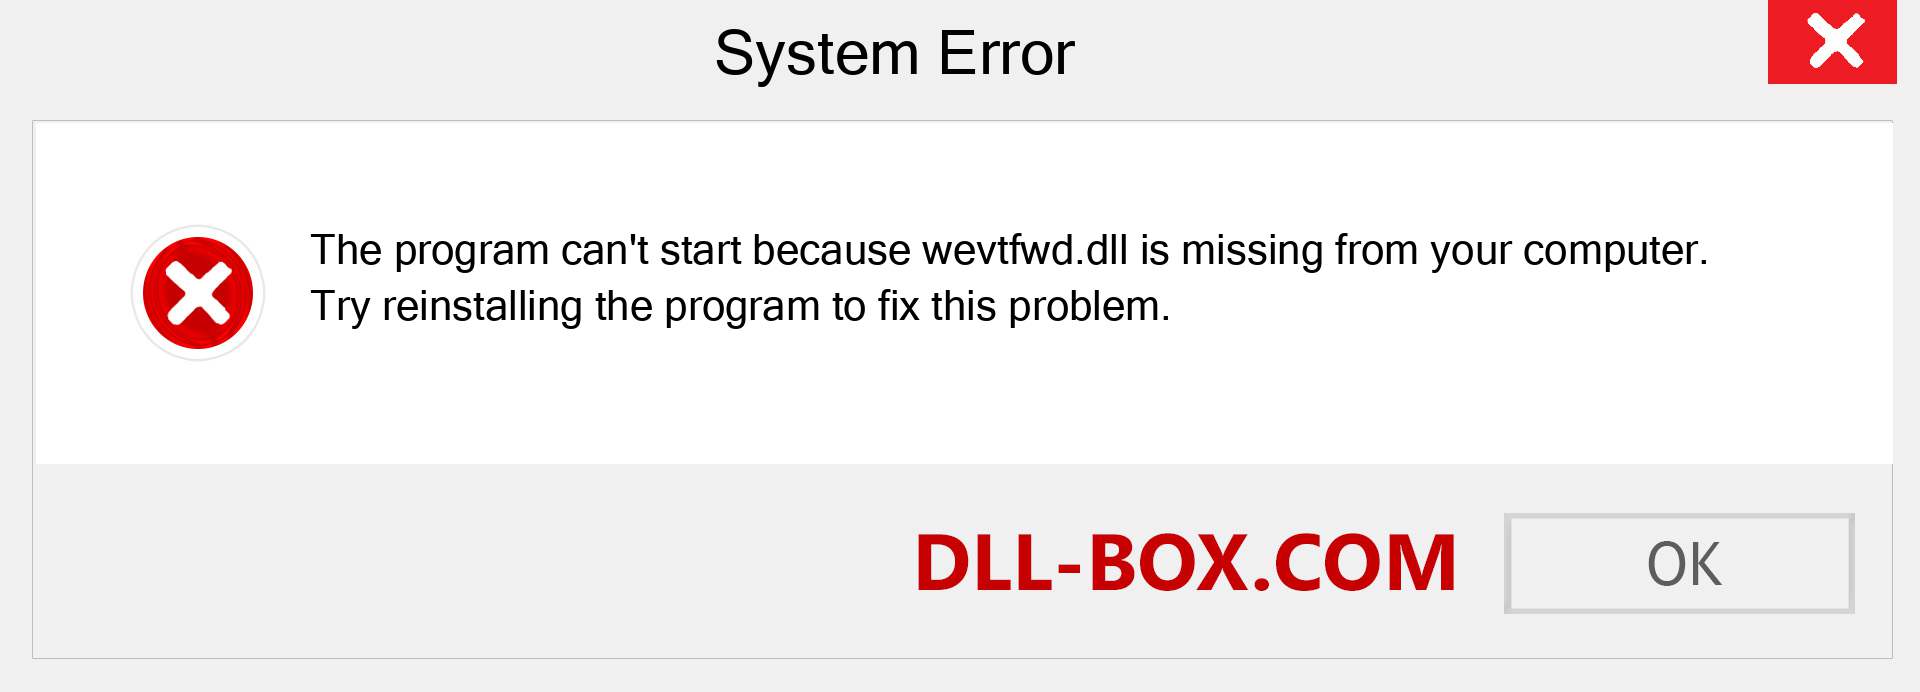  wevtfwd.dll file is missing?. Download for Windows 7, 8, 10 - Fix  wevtfwd dll Missing Error on Windows, photos, images